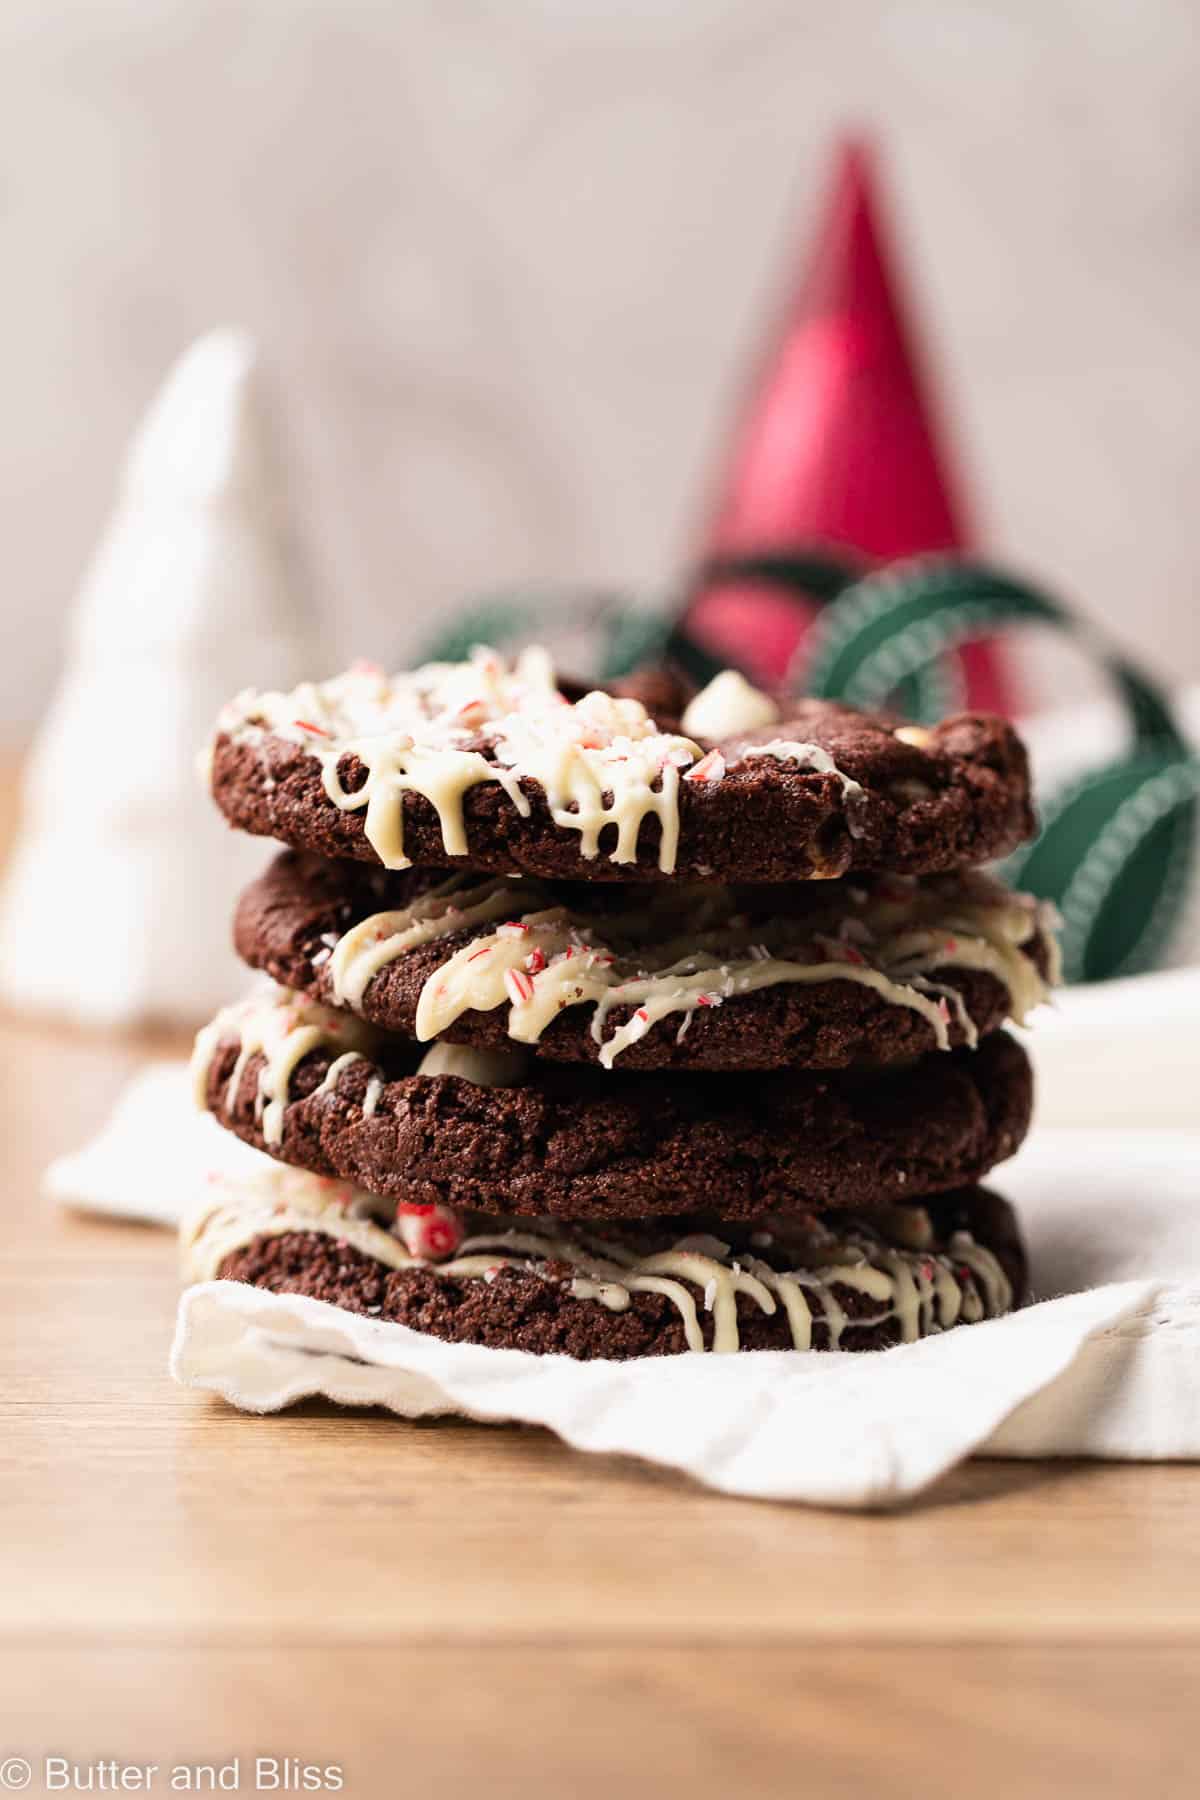 A neat stack of chocolate gluten free peppermint cookies with white chips and drizzle.